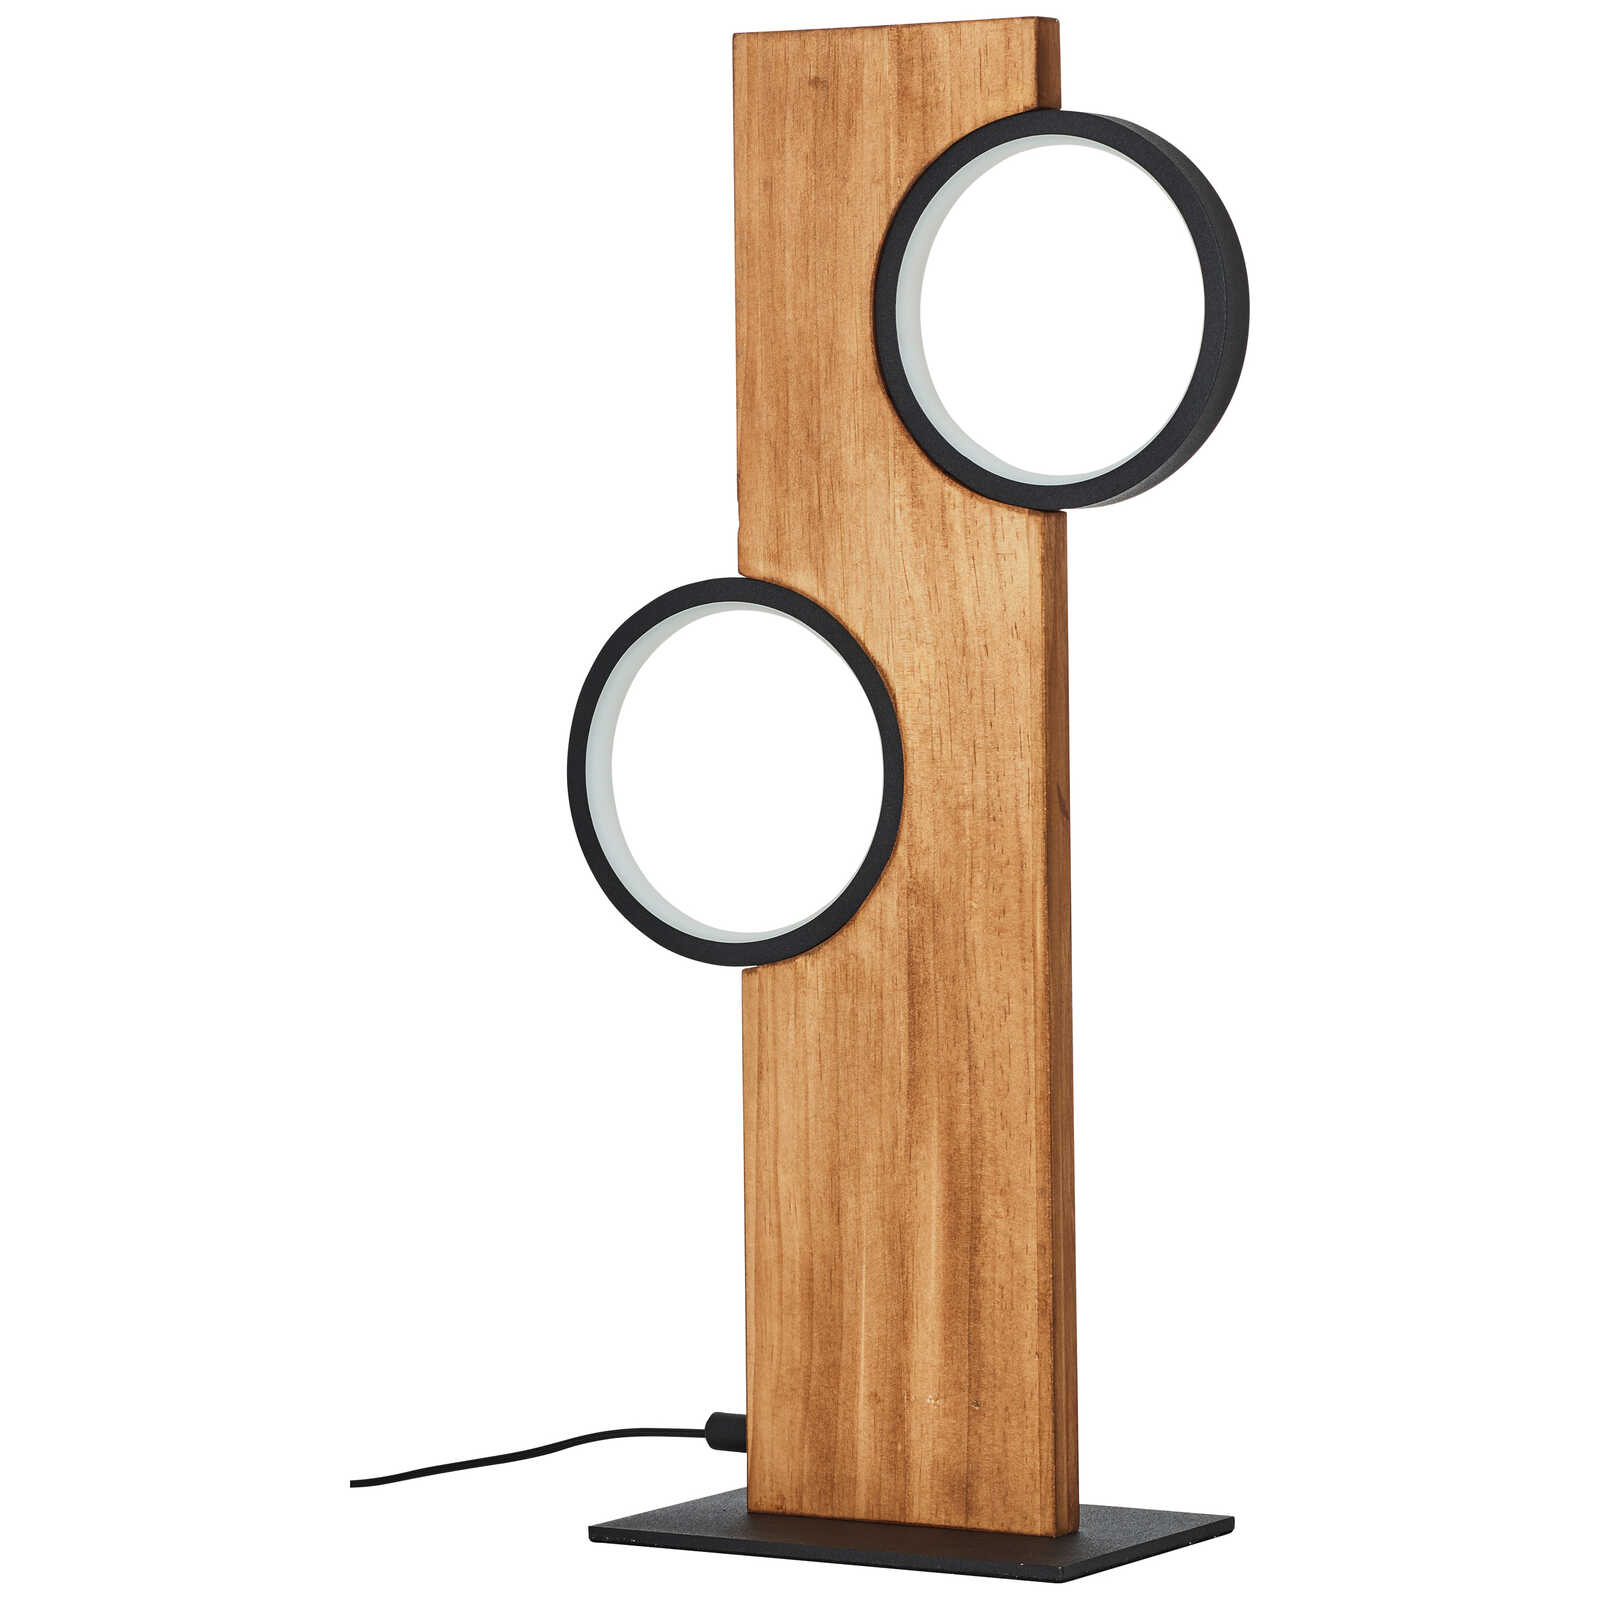             Wooden table lamp - Elena 2 - Brown
        